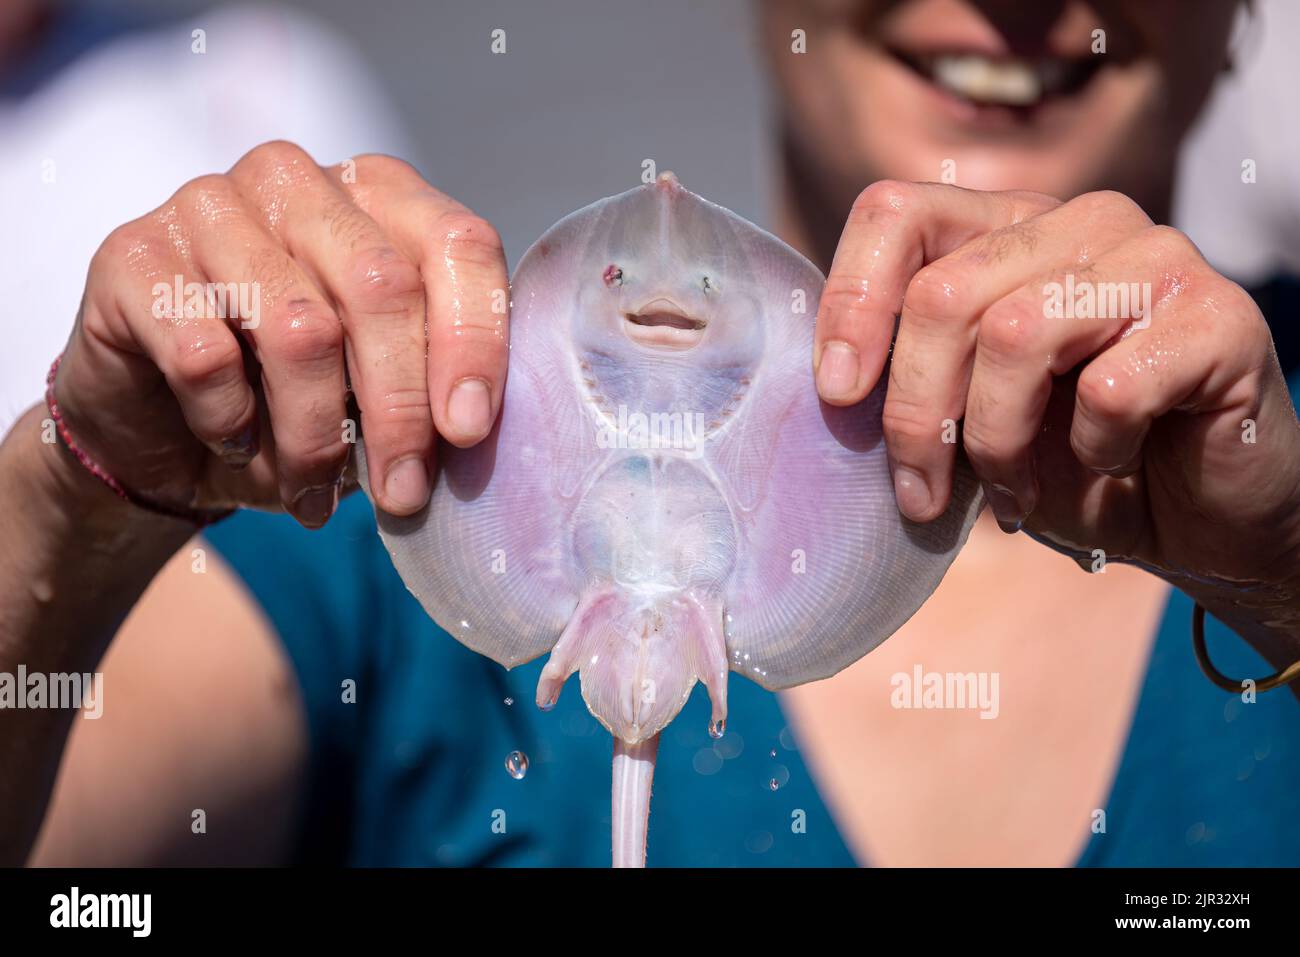 Smiling thornback ray (Raja clavata) held by the two hands of a smiling woman in the background. Stock Photo